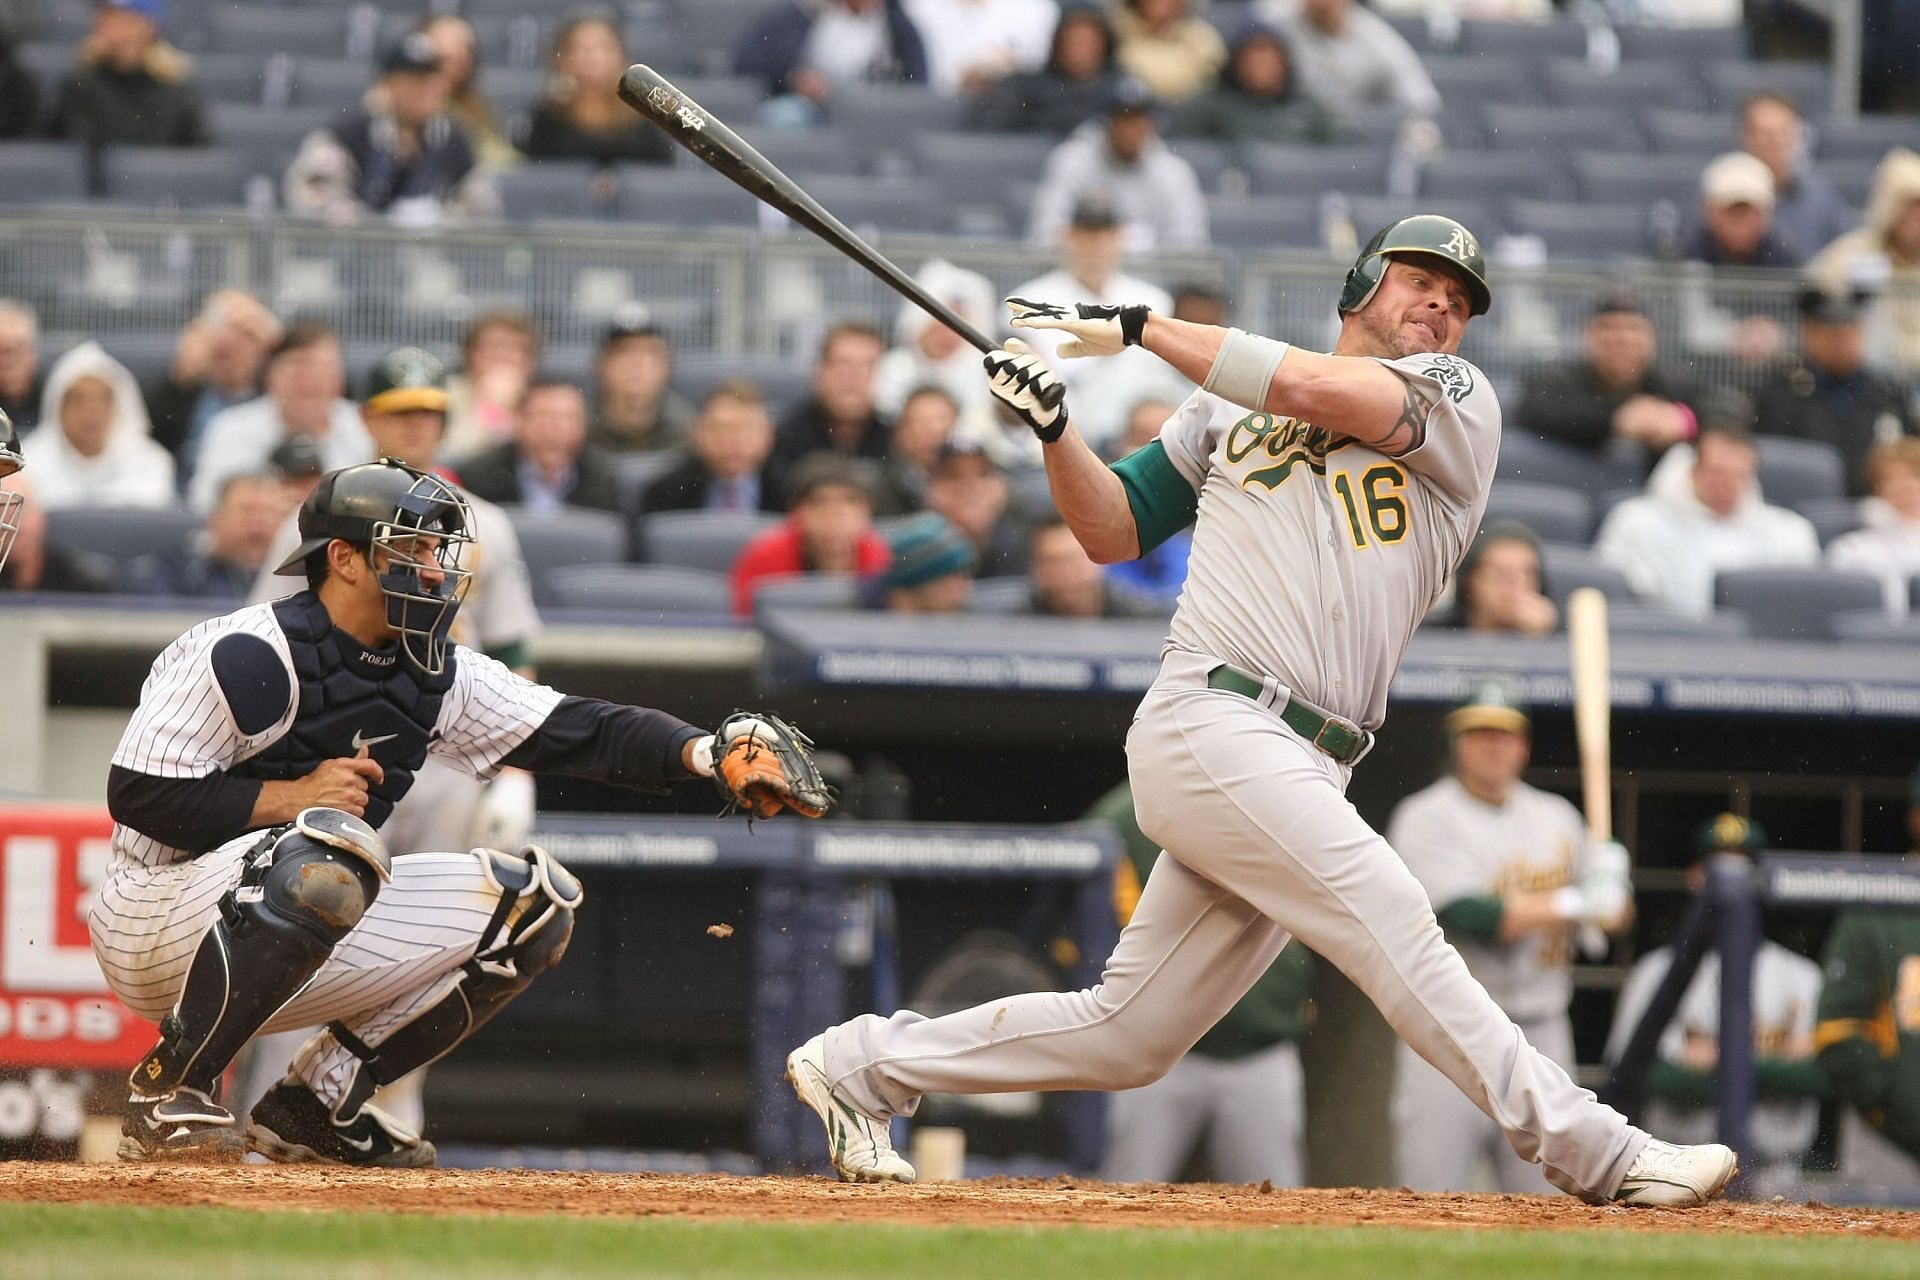 Oakland Athletics v New York Yankees NEW YORK - APRIL 22: Jason Giambi #16 of The Oakland Athletics in action against The New York Yankees during their game on April 22, 2009 at Yankee Stadium in the Bronx Borough of New York. (Photo by Al Bello/Getty Images)